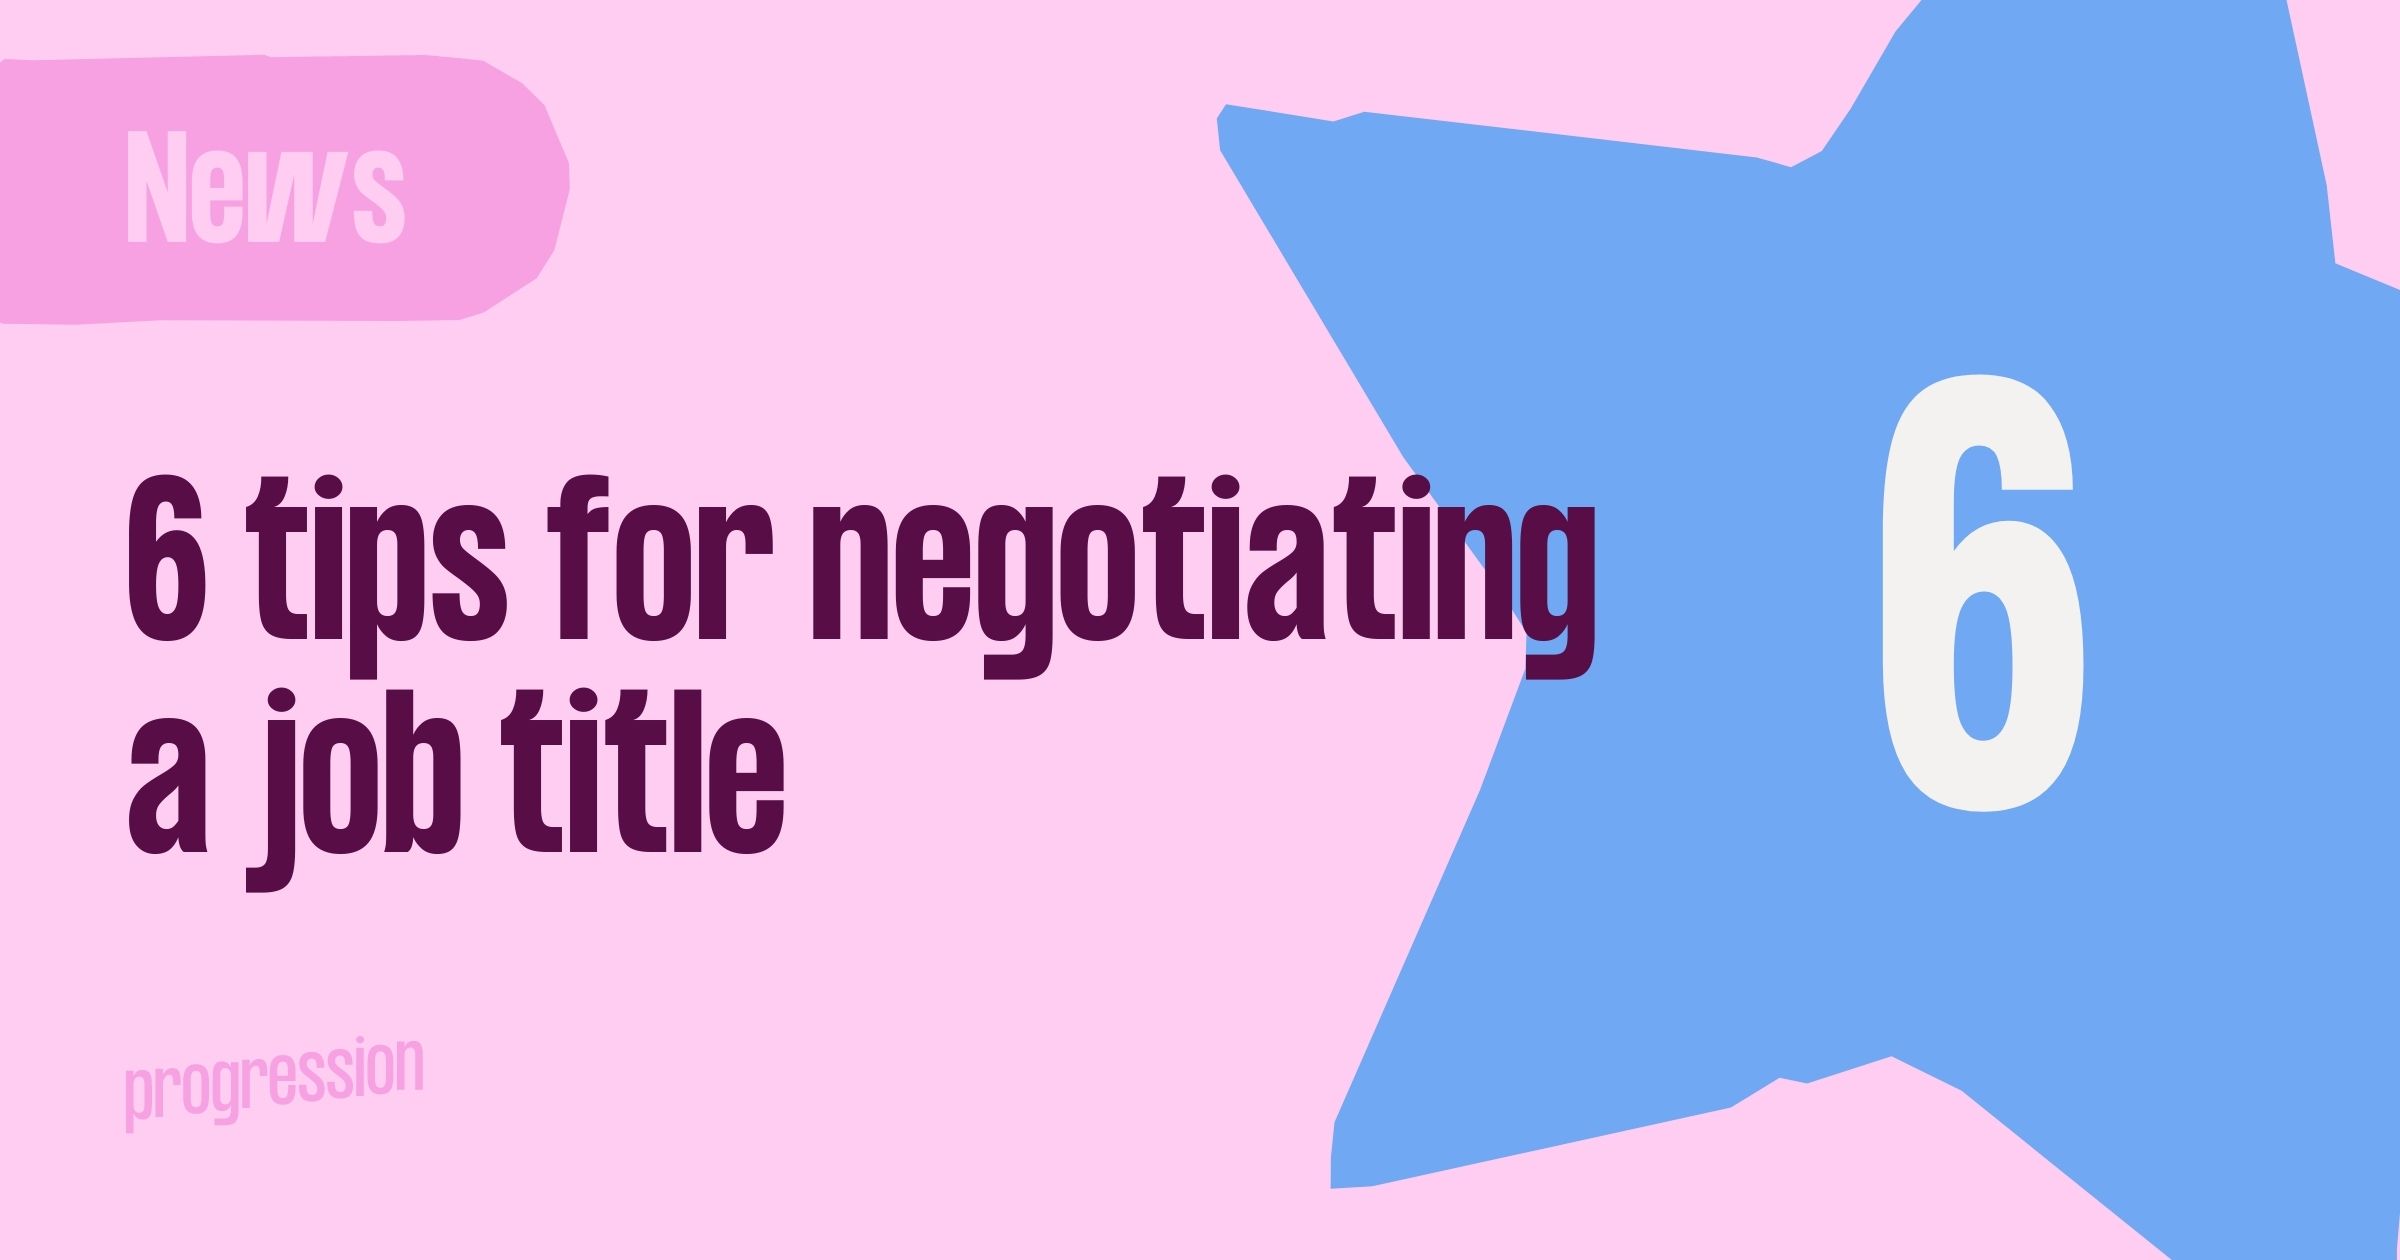 How to ask for a job title change: 6 tips for negotiating a job title